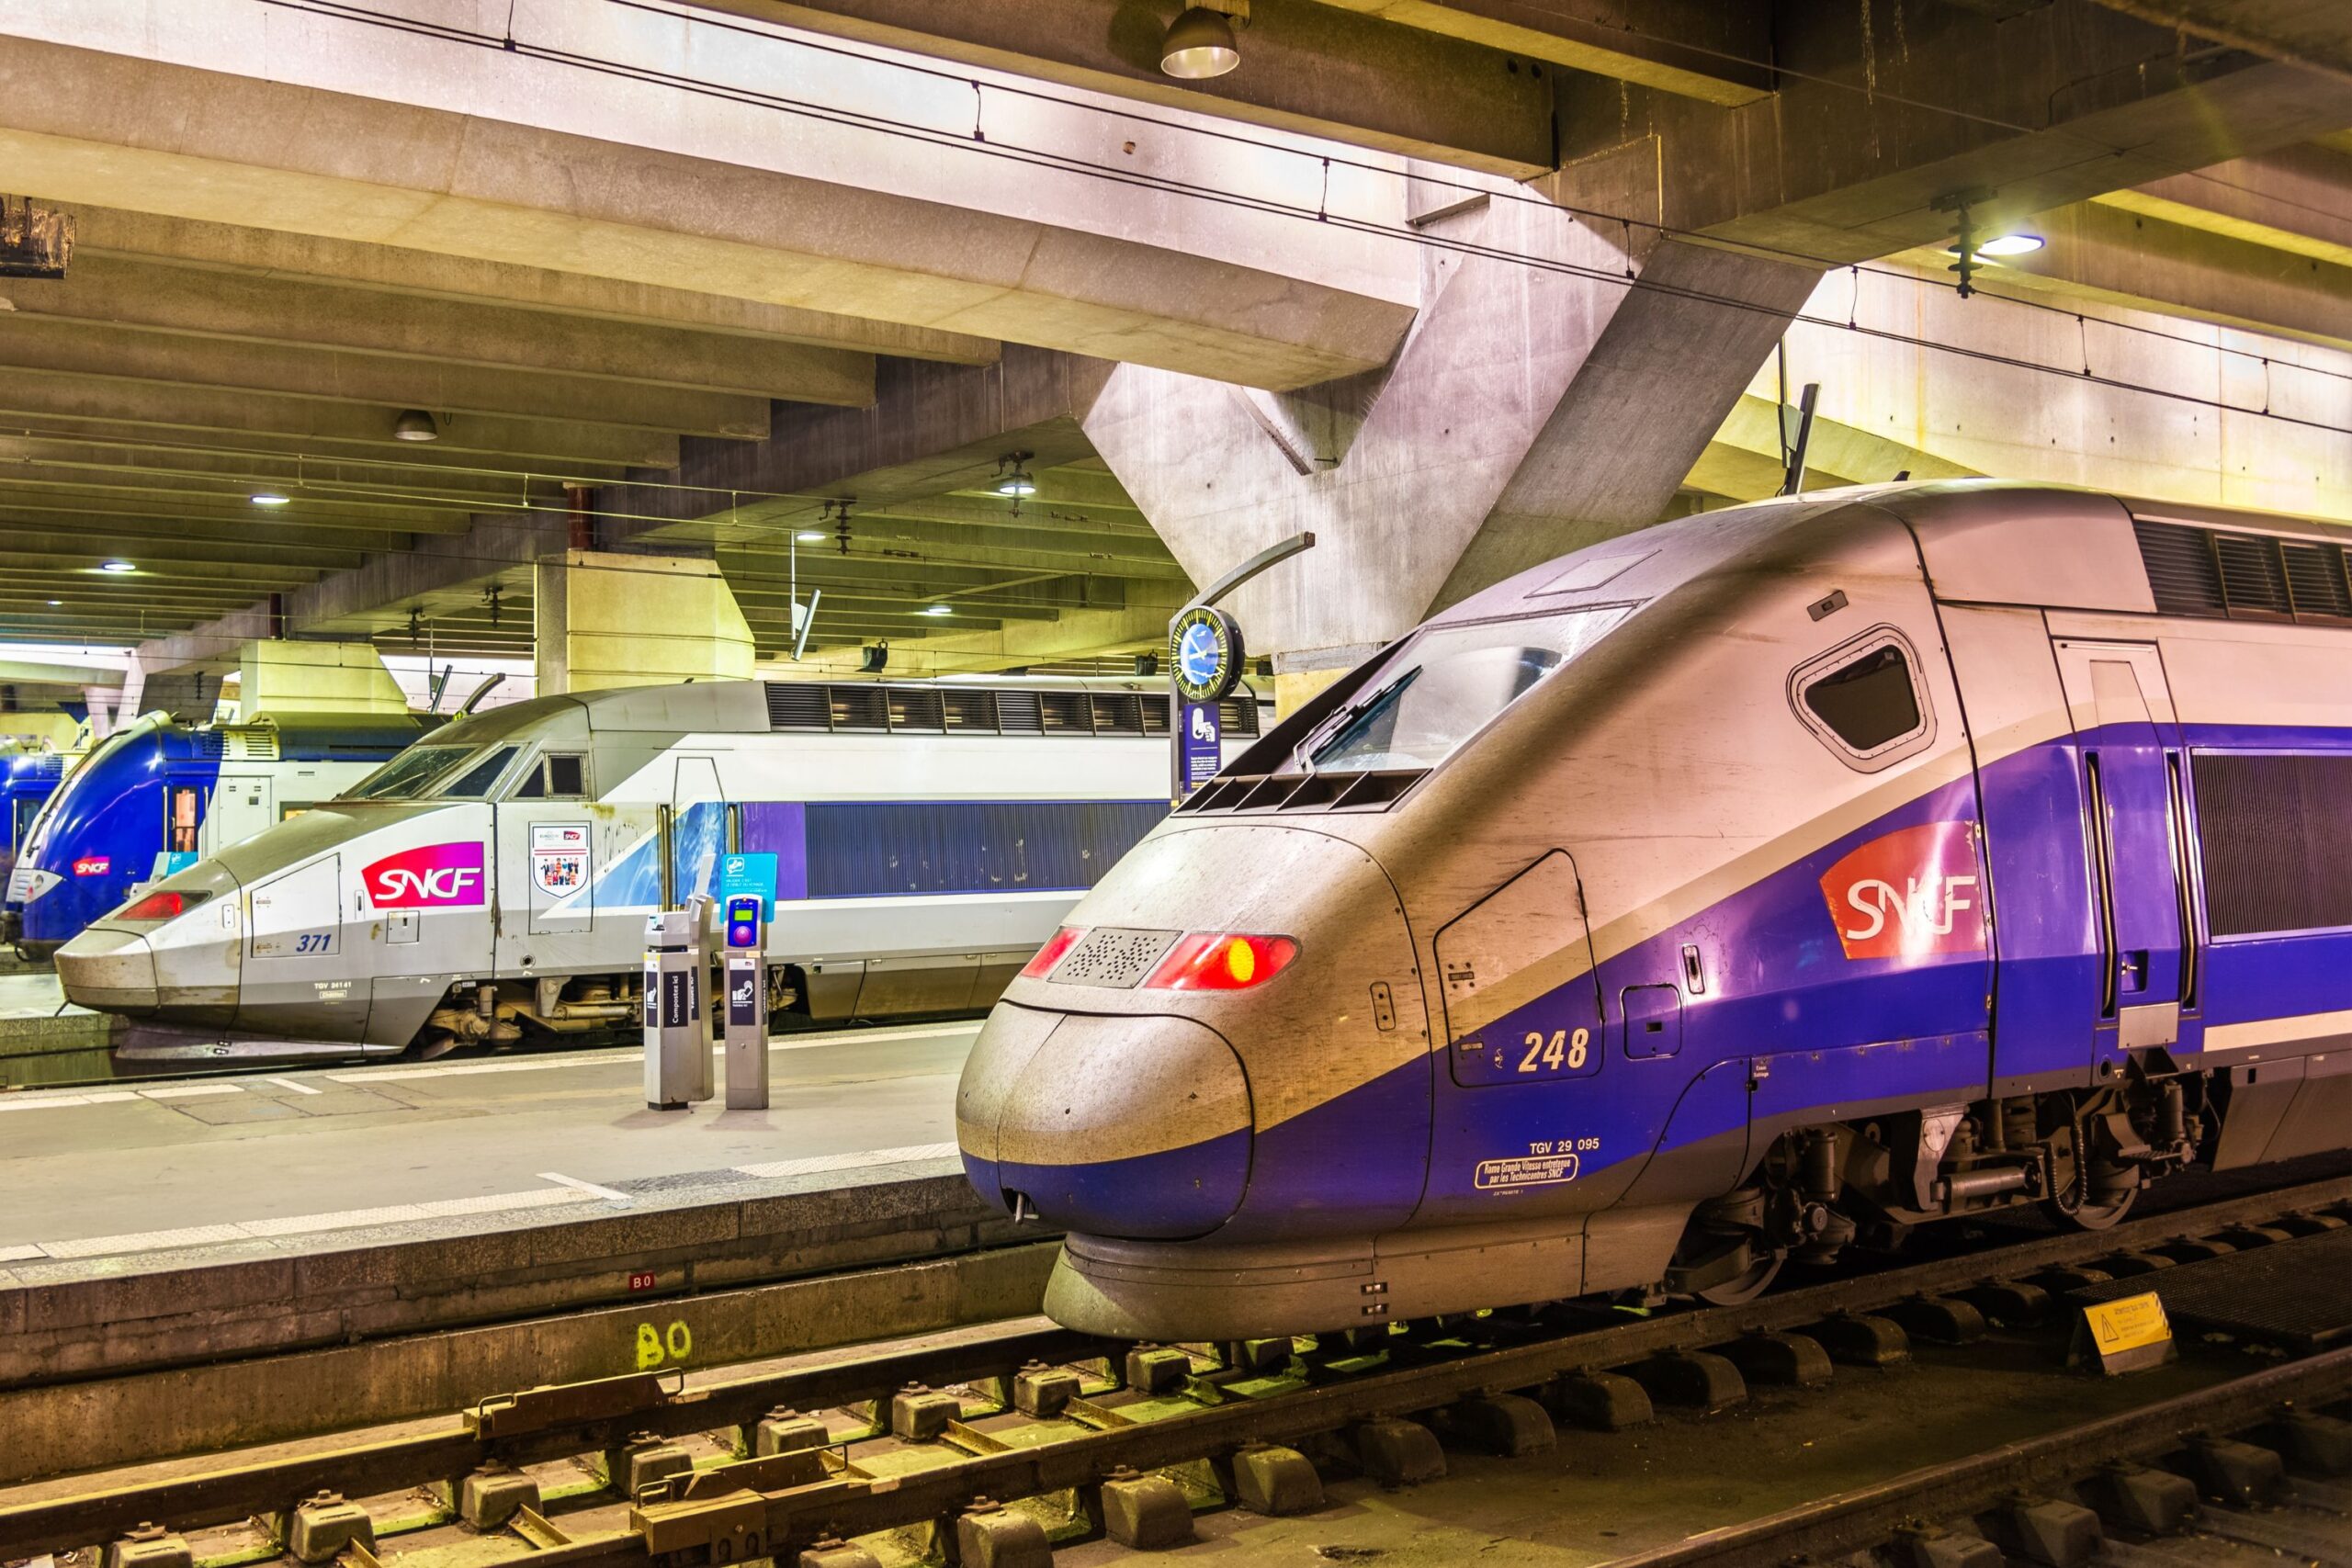 High speed train from Paris to Amsterdam